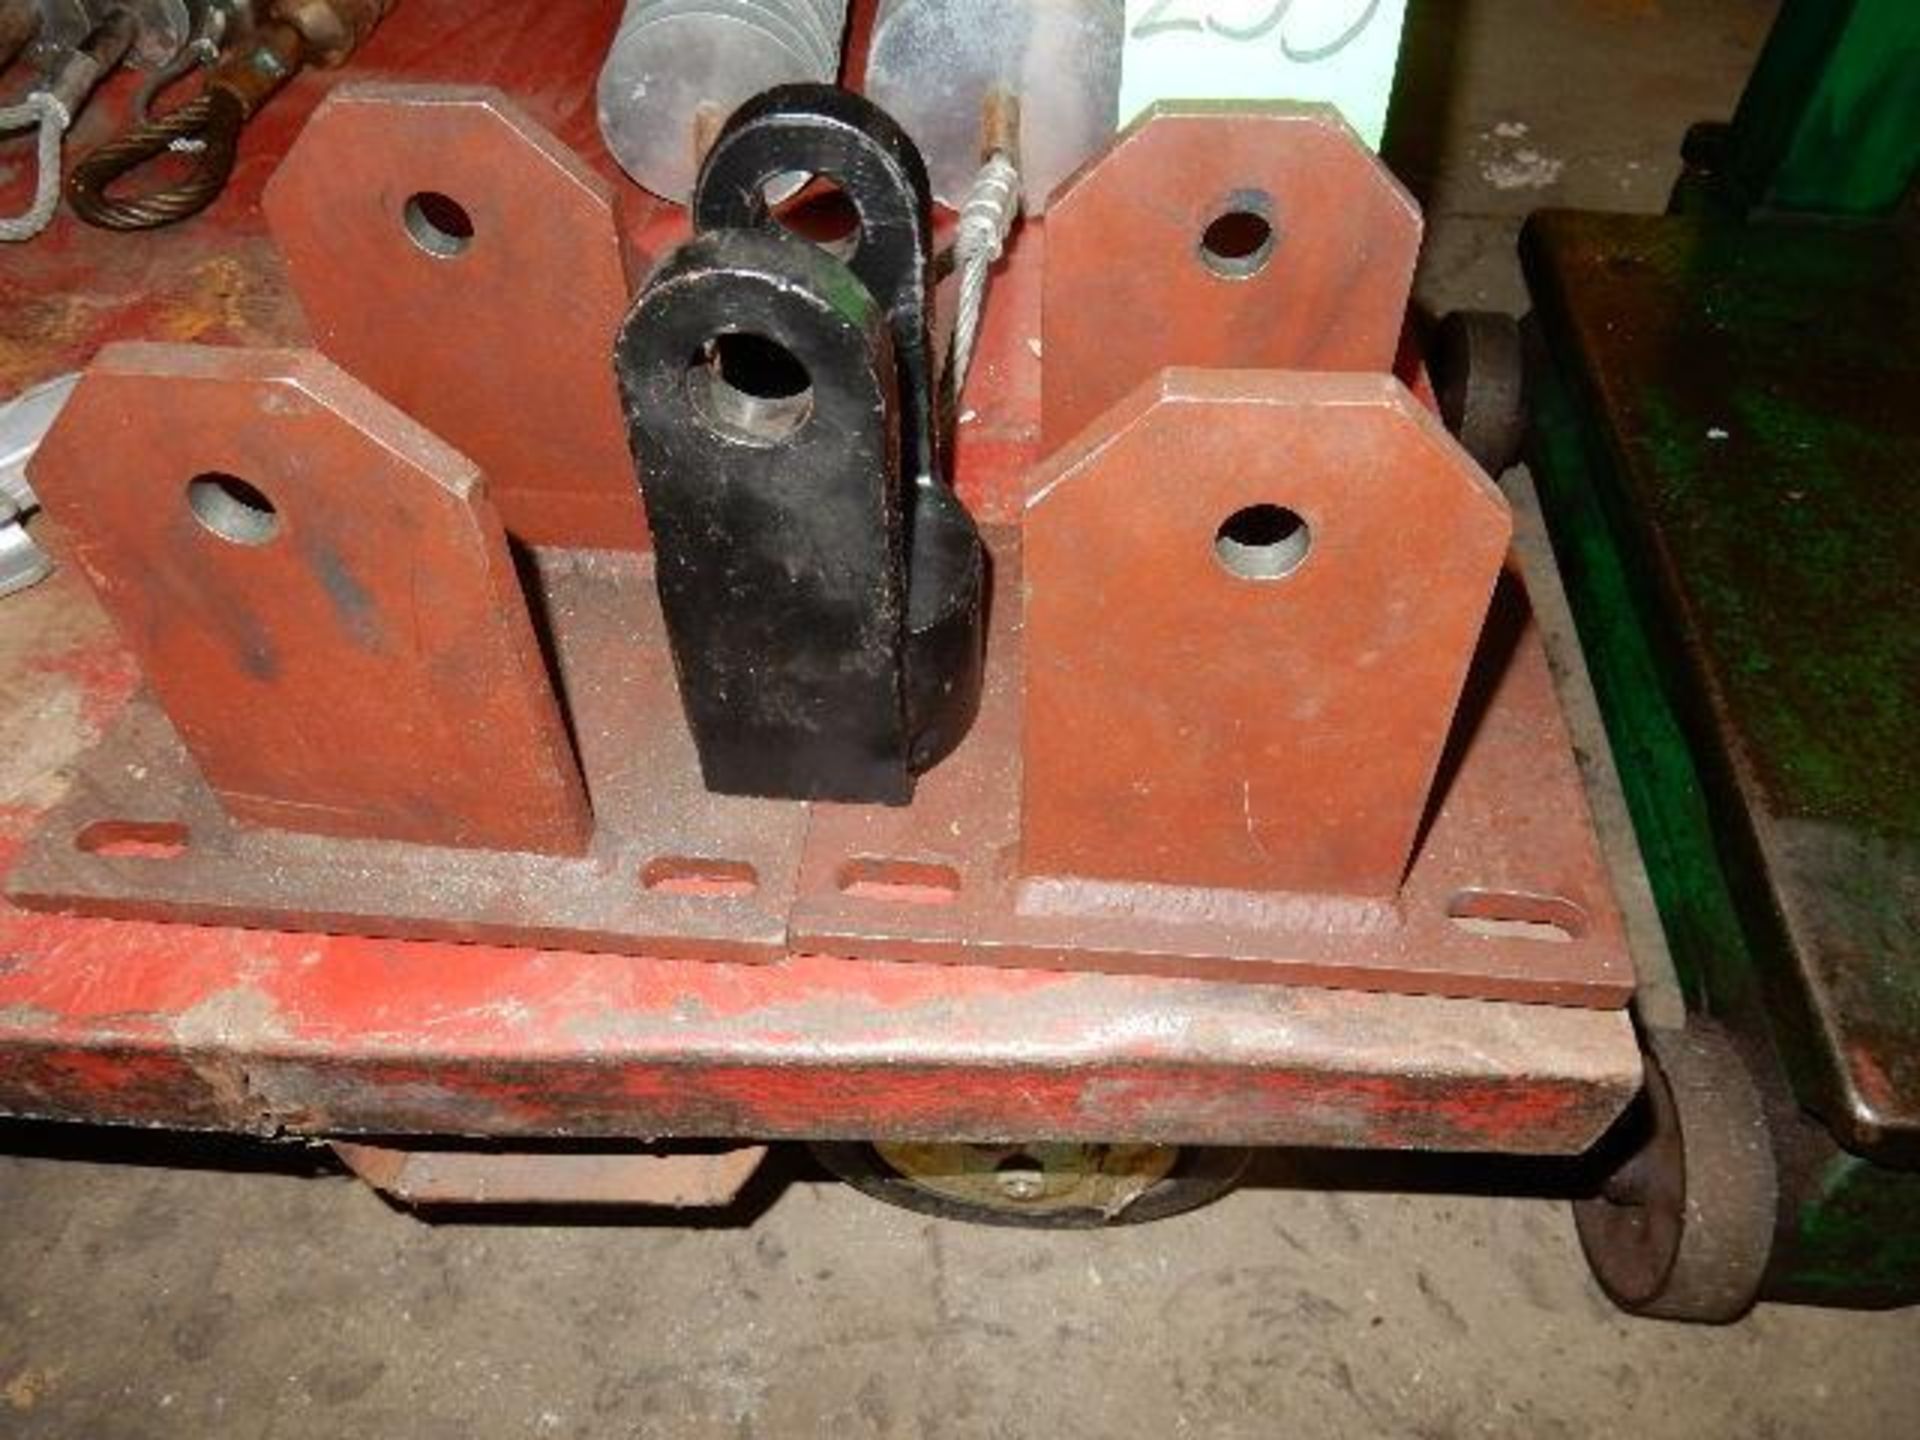 2ea Wheels Stand For Carts 1ea Steel York for Hyd Ram - Image 2 of 4